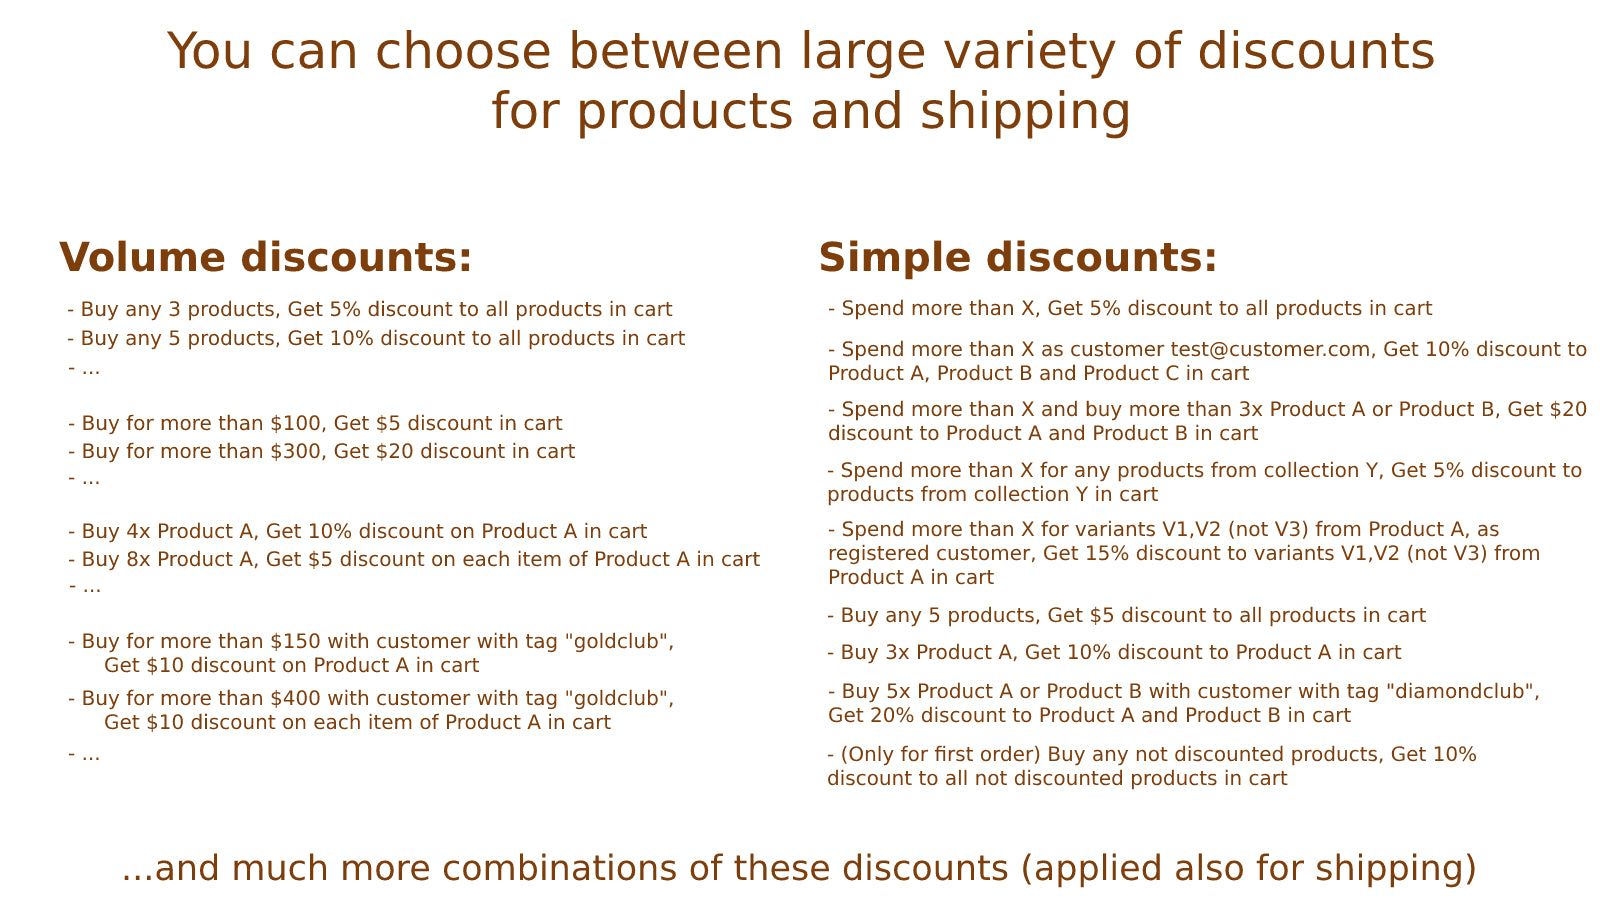 You can choose between large variety of discounts